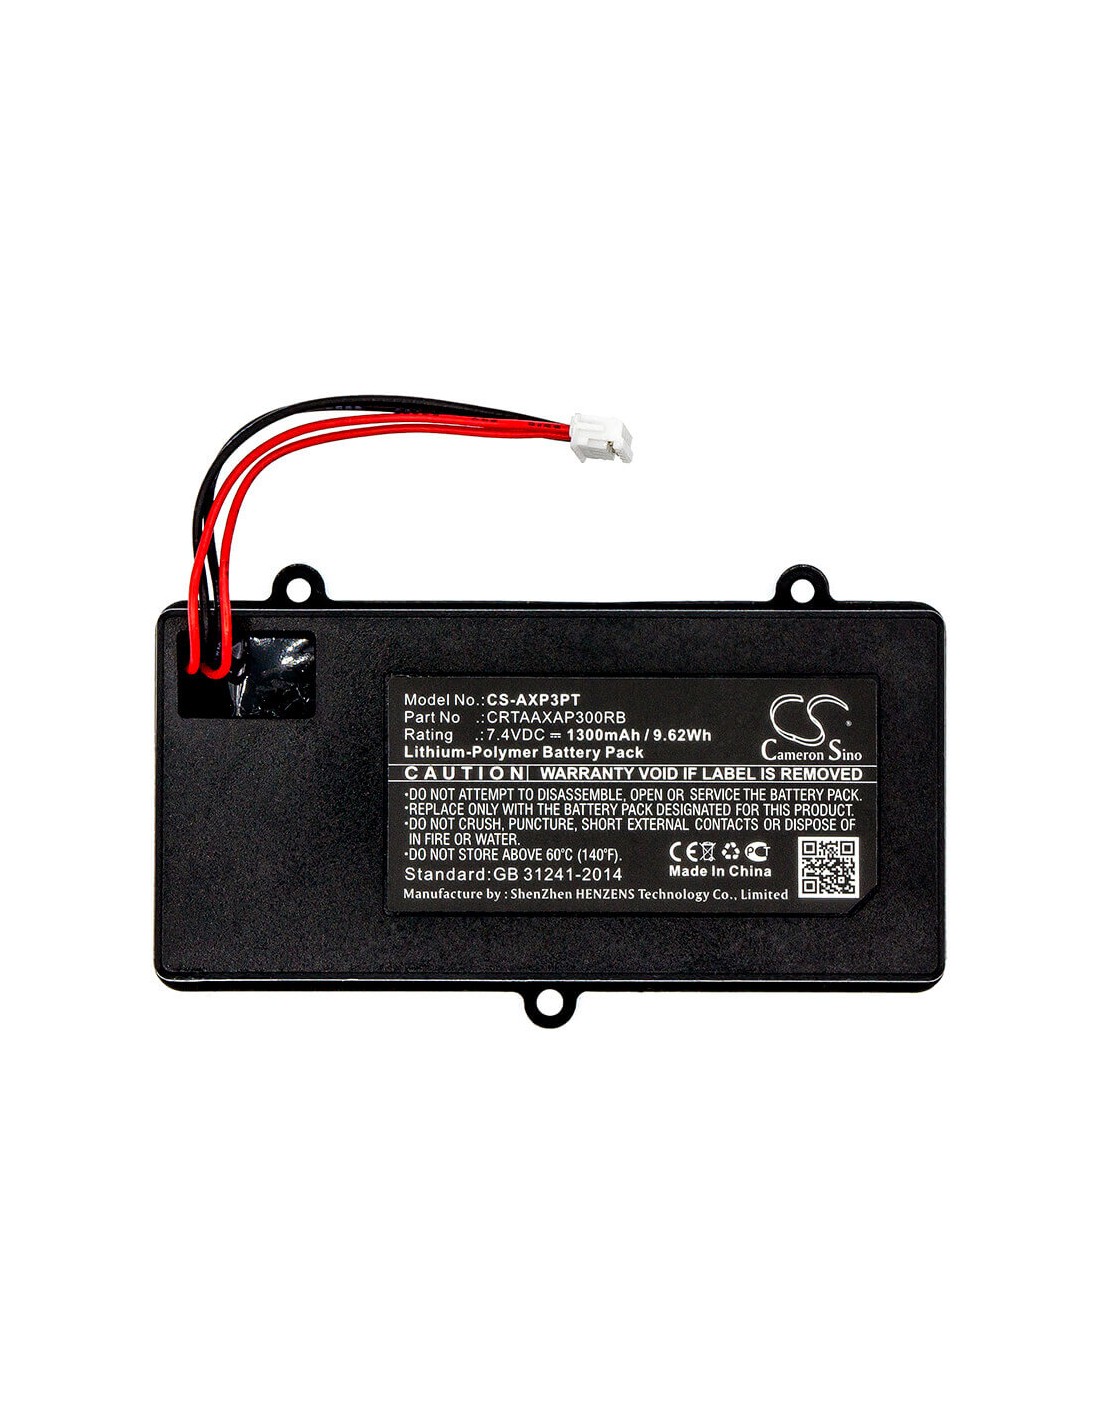 Battery for Aaxa, P300 Pico Projector 7.4V, 1300mAh - 9.62Wh